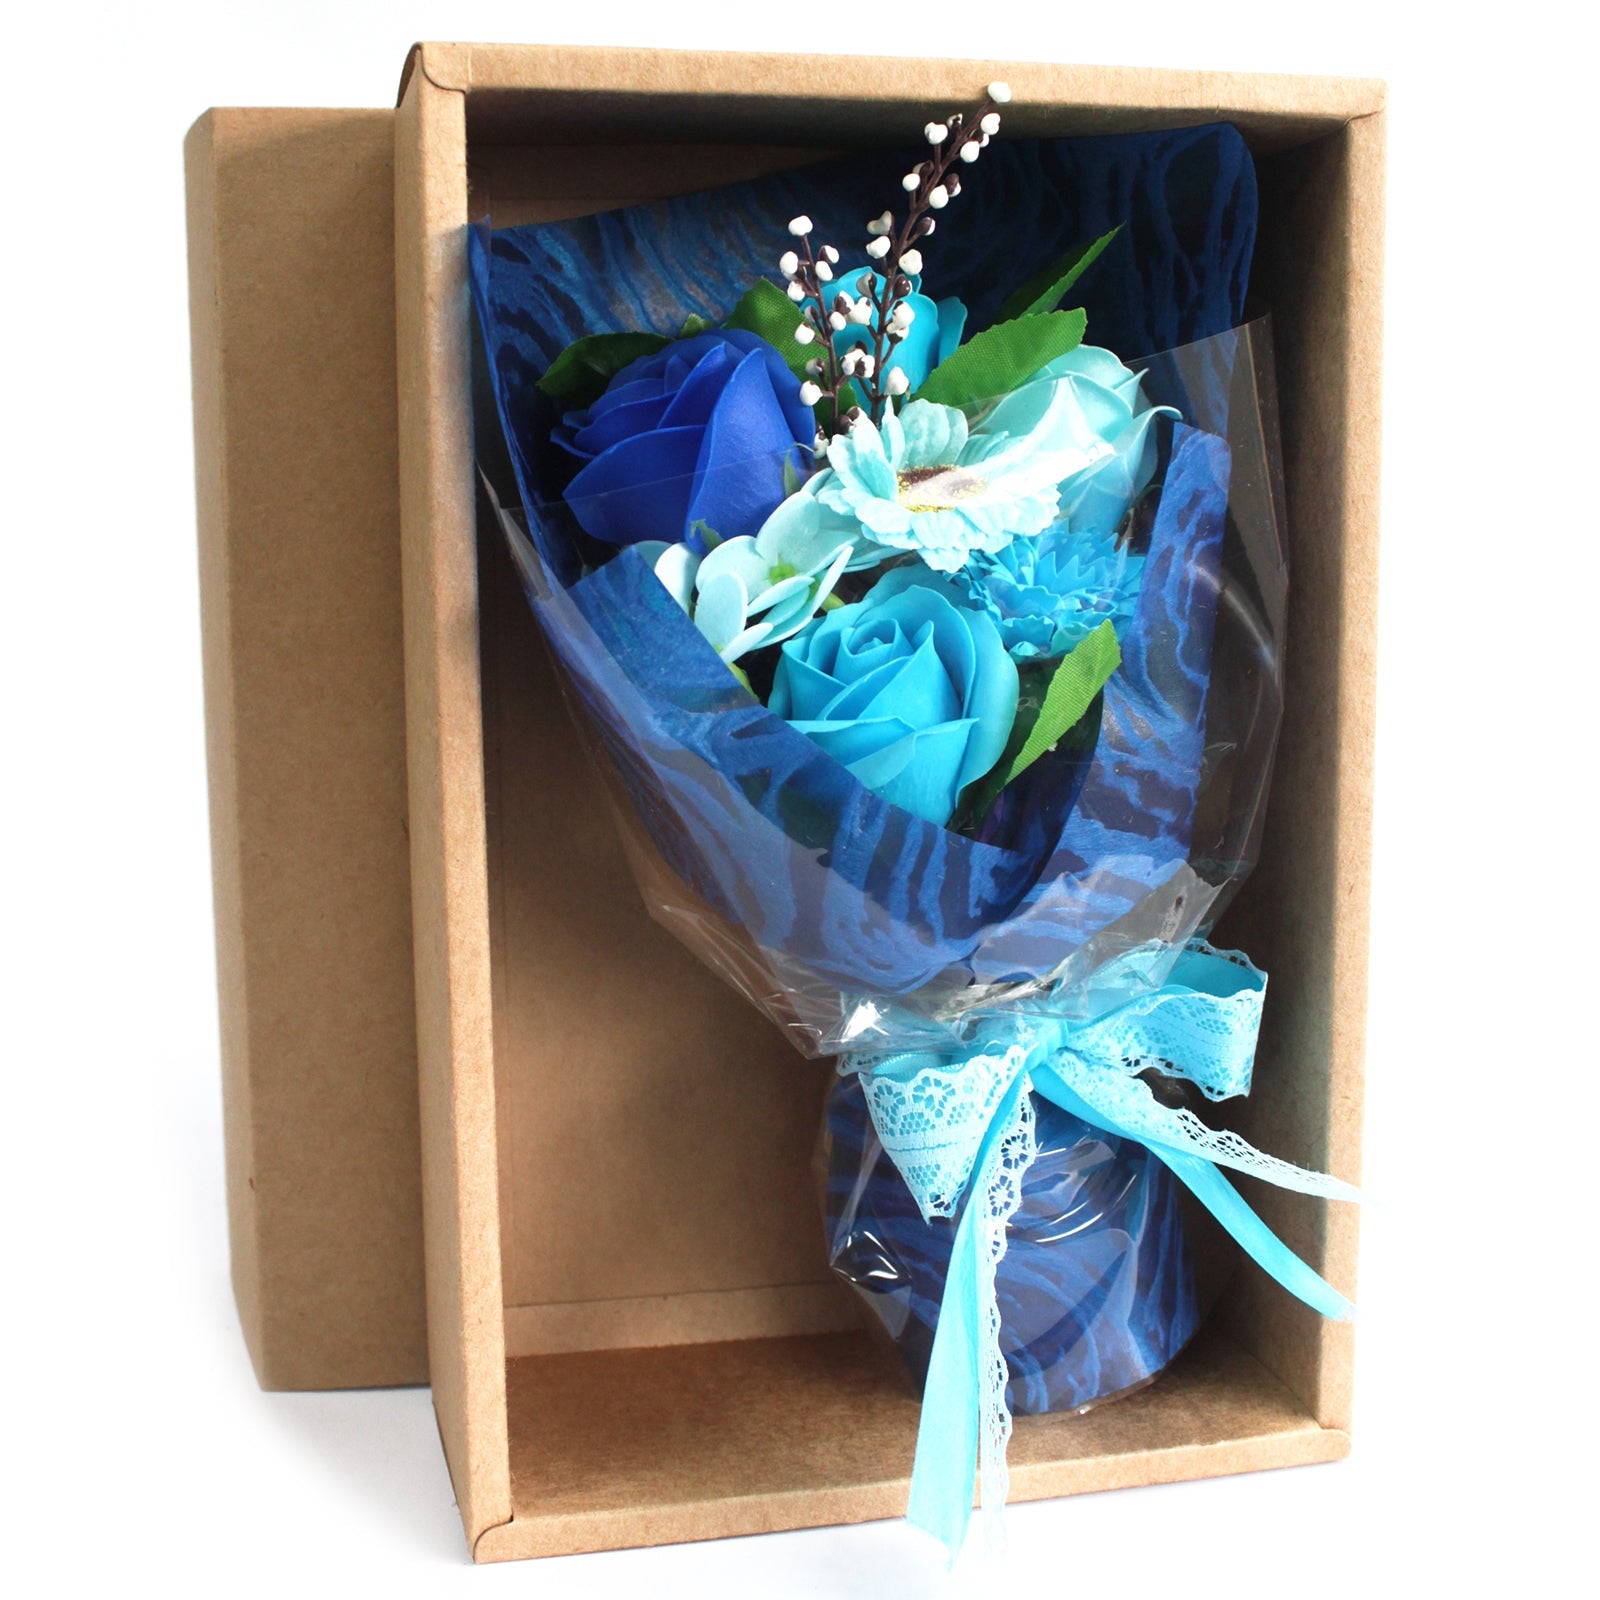 Flower Soap Bouquet - Gift Boxed Soap Flowers Soul Inspired Blue 